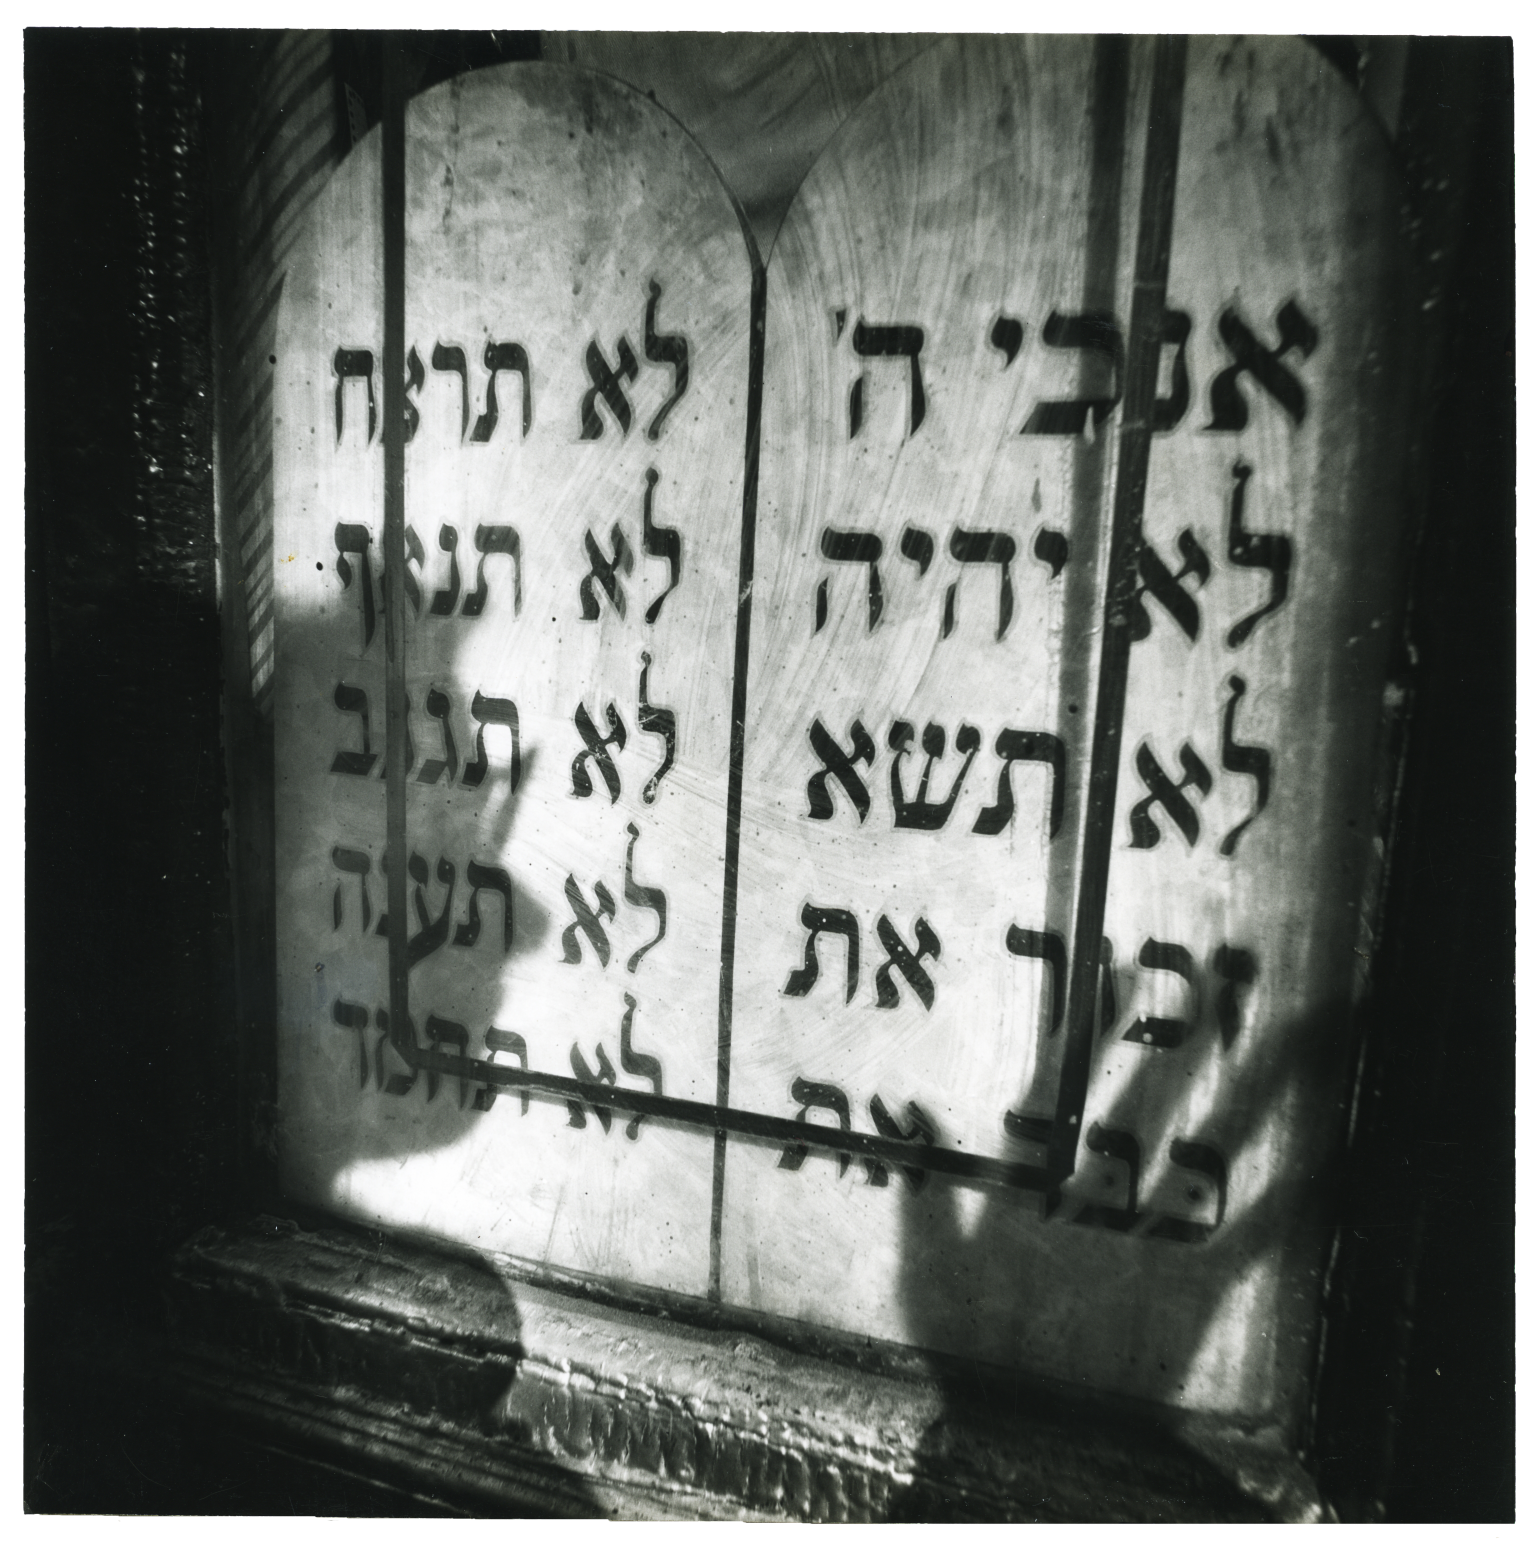 Photograph featuring shadow of a face and a hand over a wall with Hebrew text. 